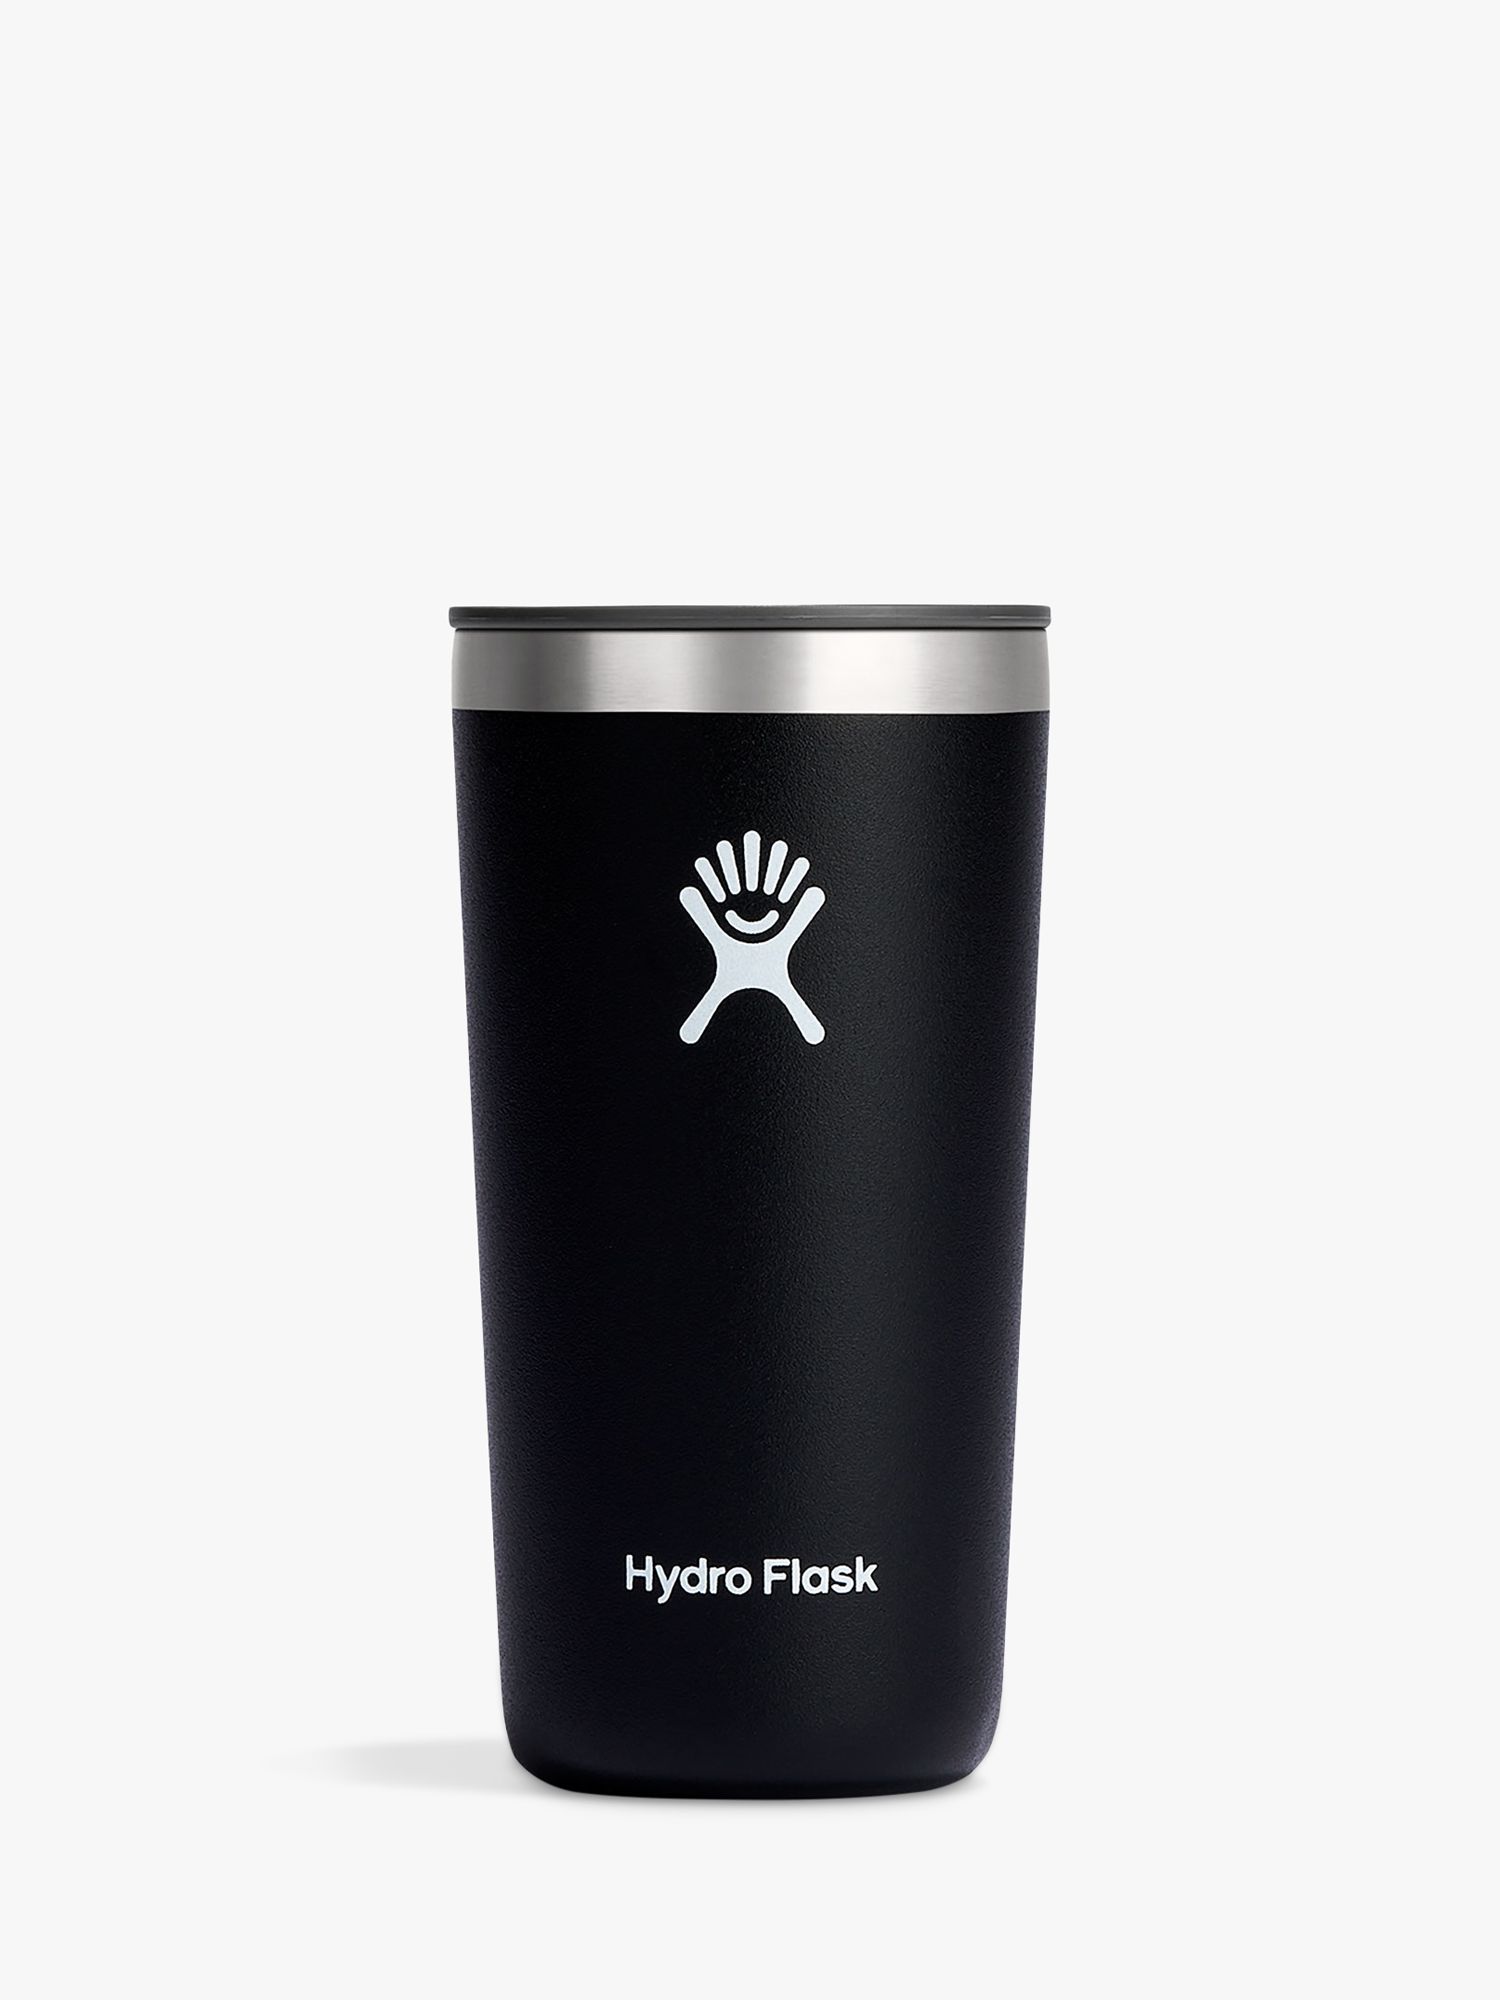 Hydro　Black　Flask　Tumbler,　Insulated　Stainless　Steel　354ml,　All　Around